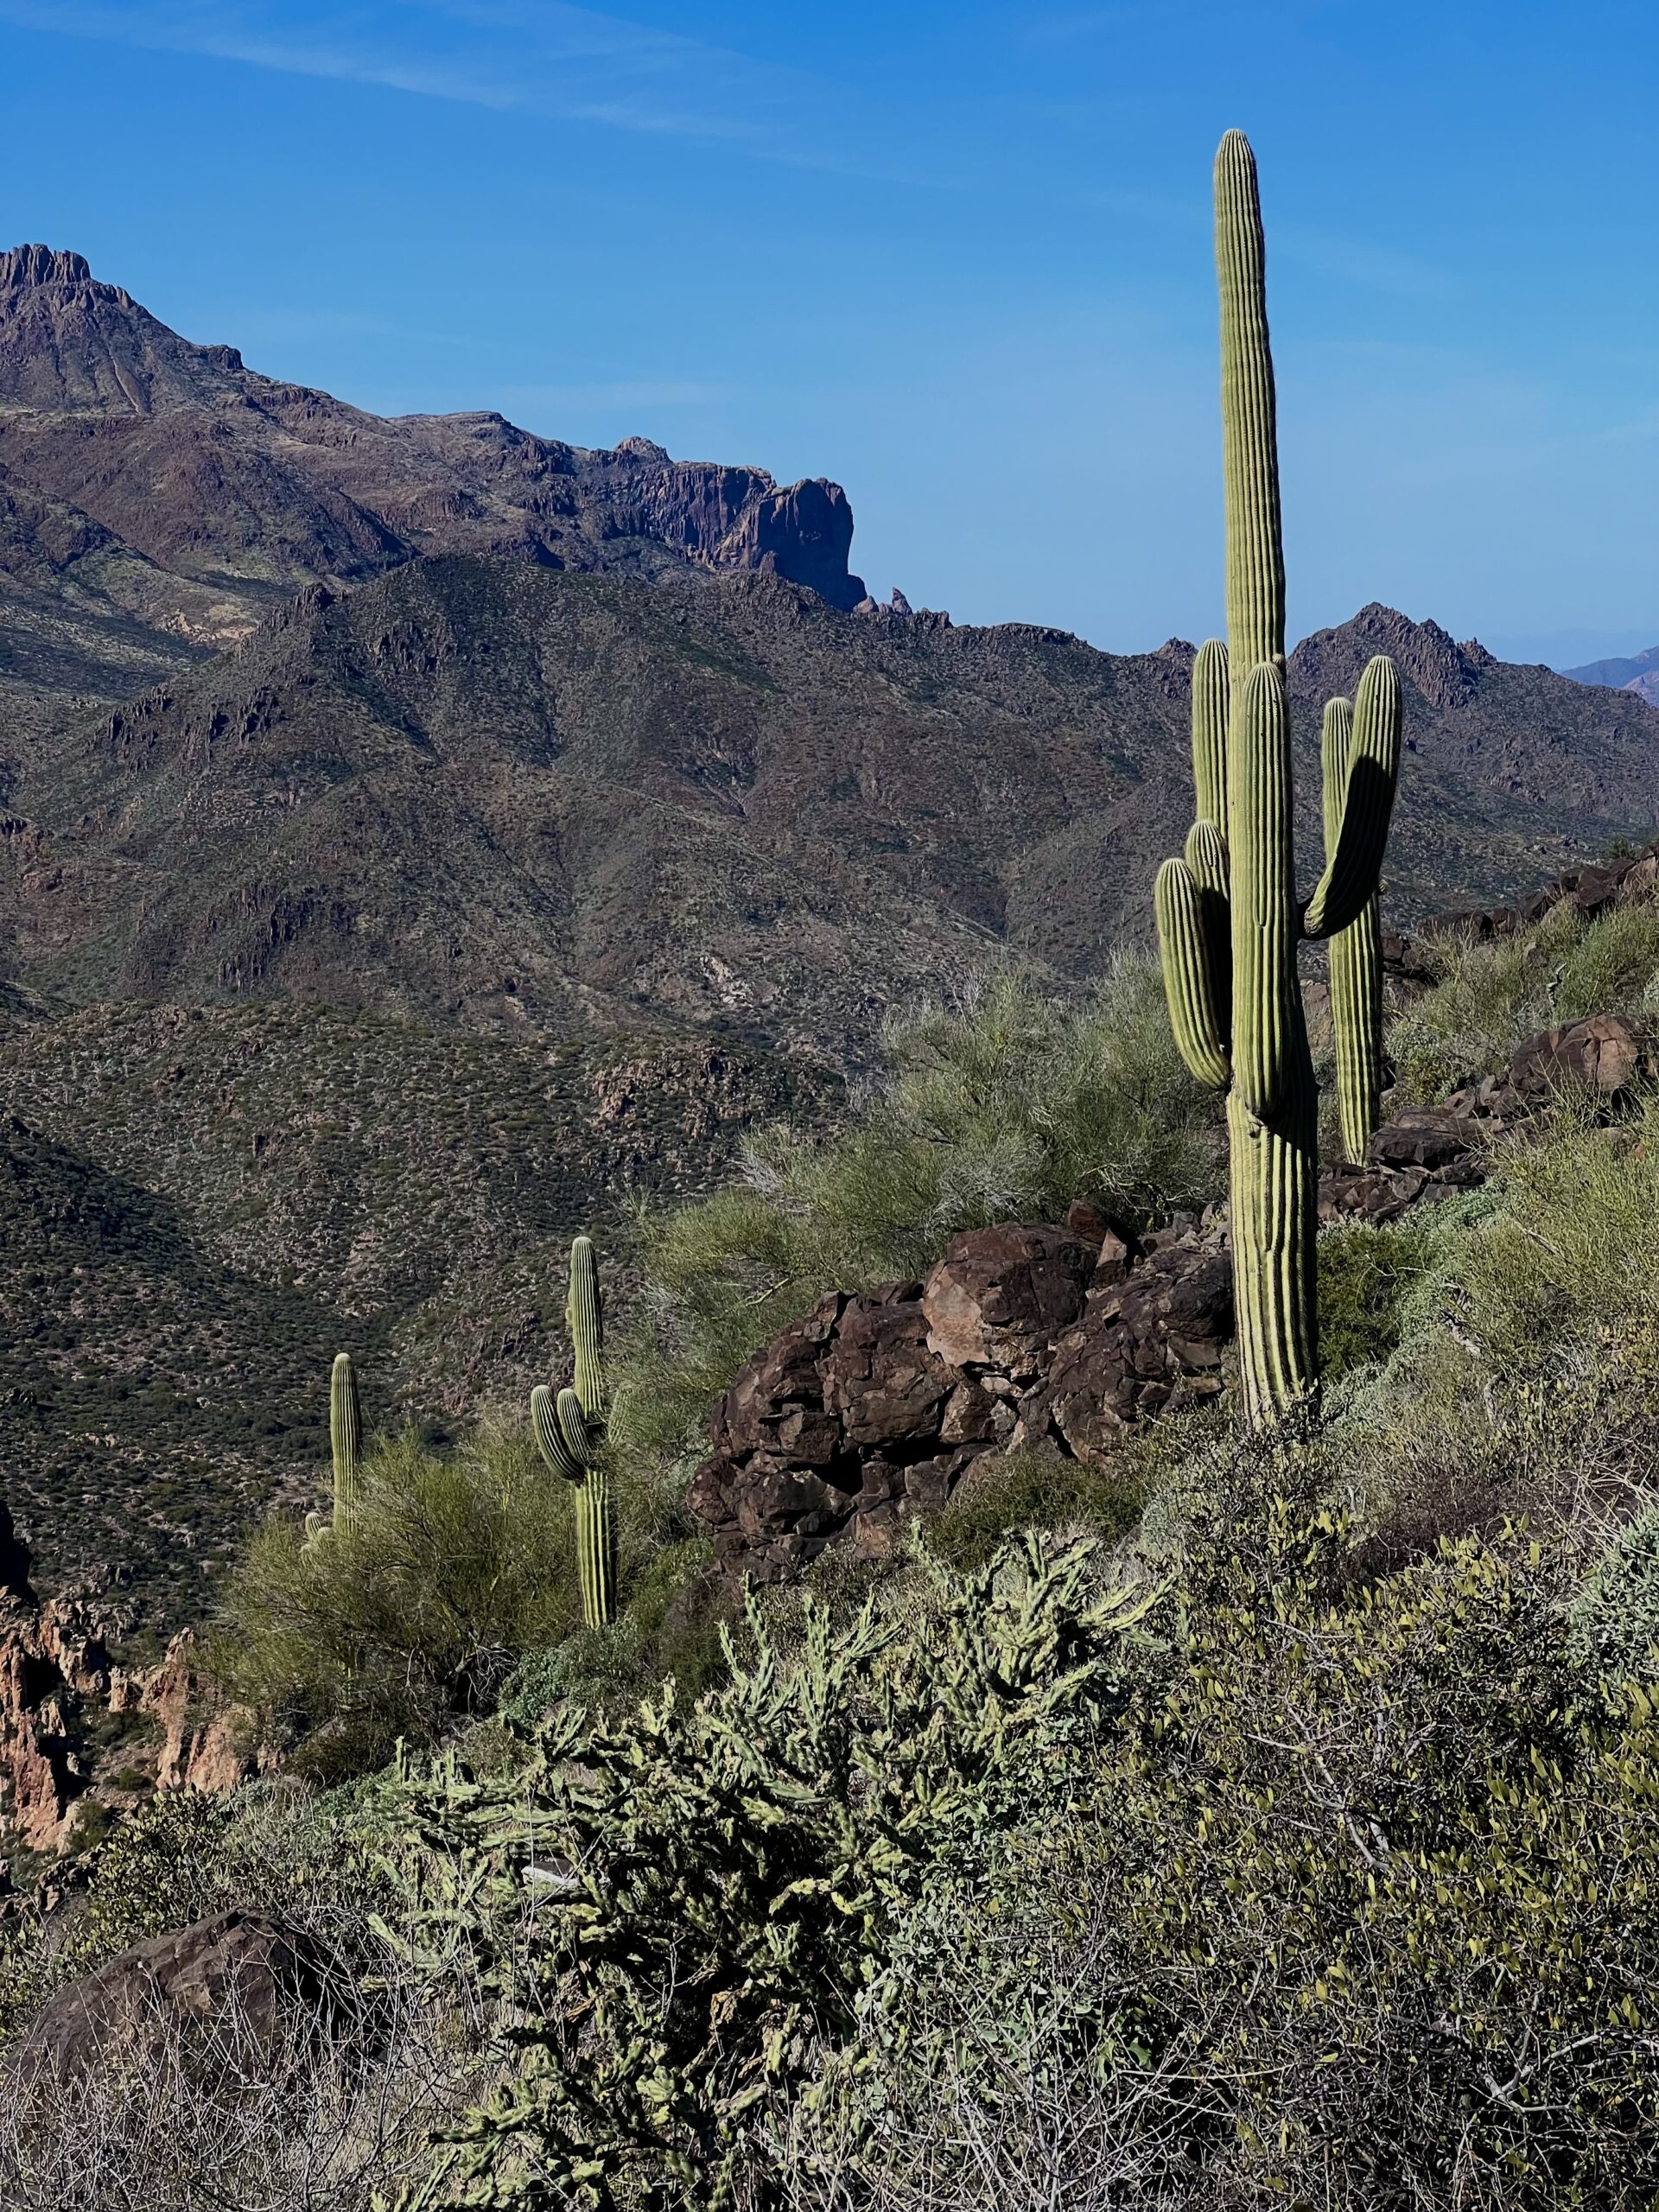 Black Mountain with a Slope of Tall Cactus